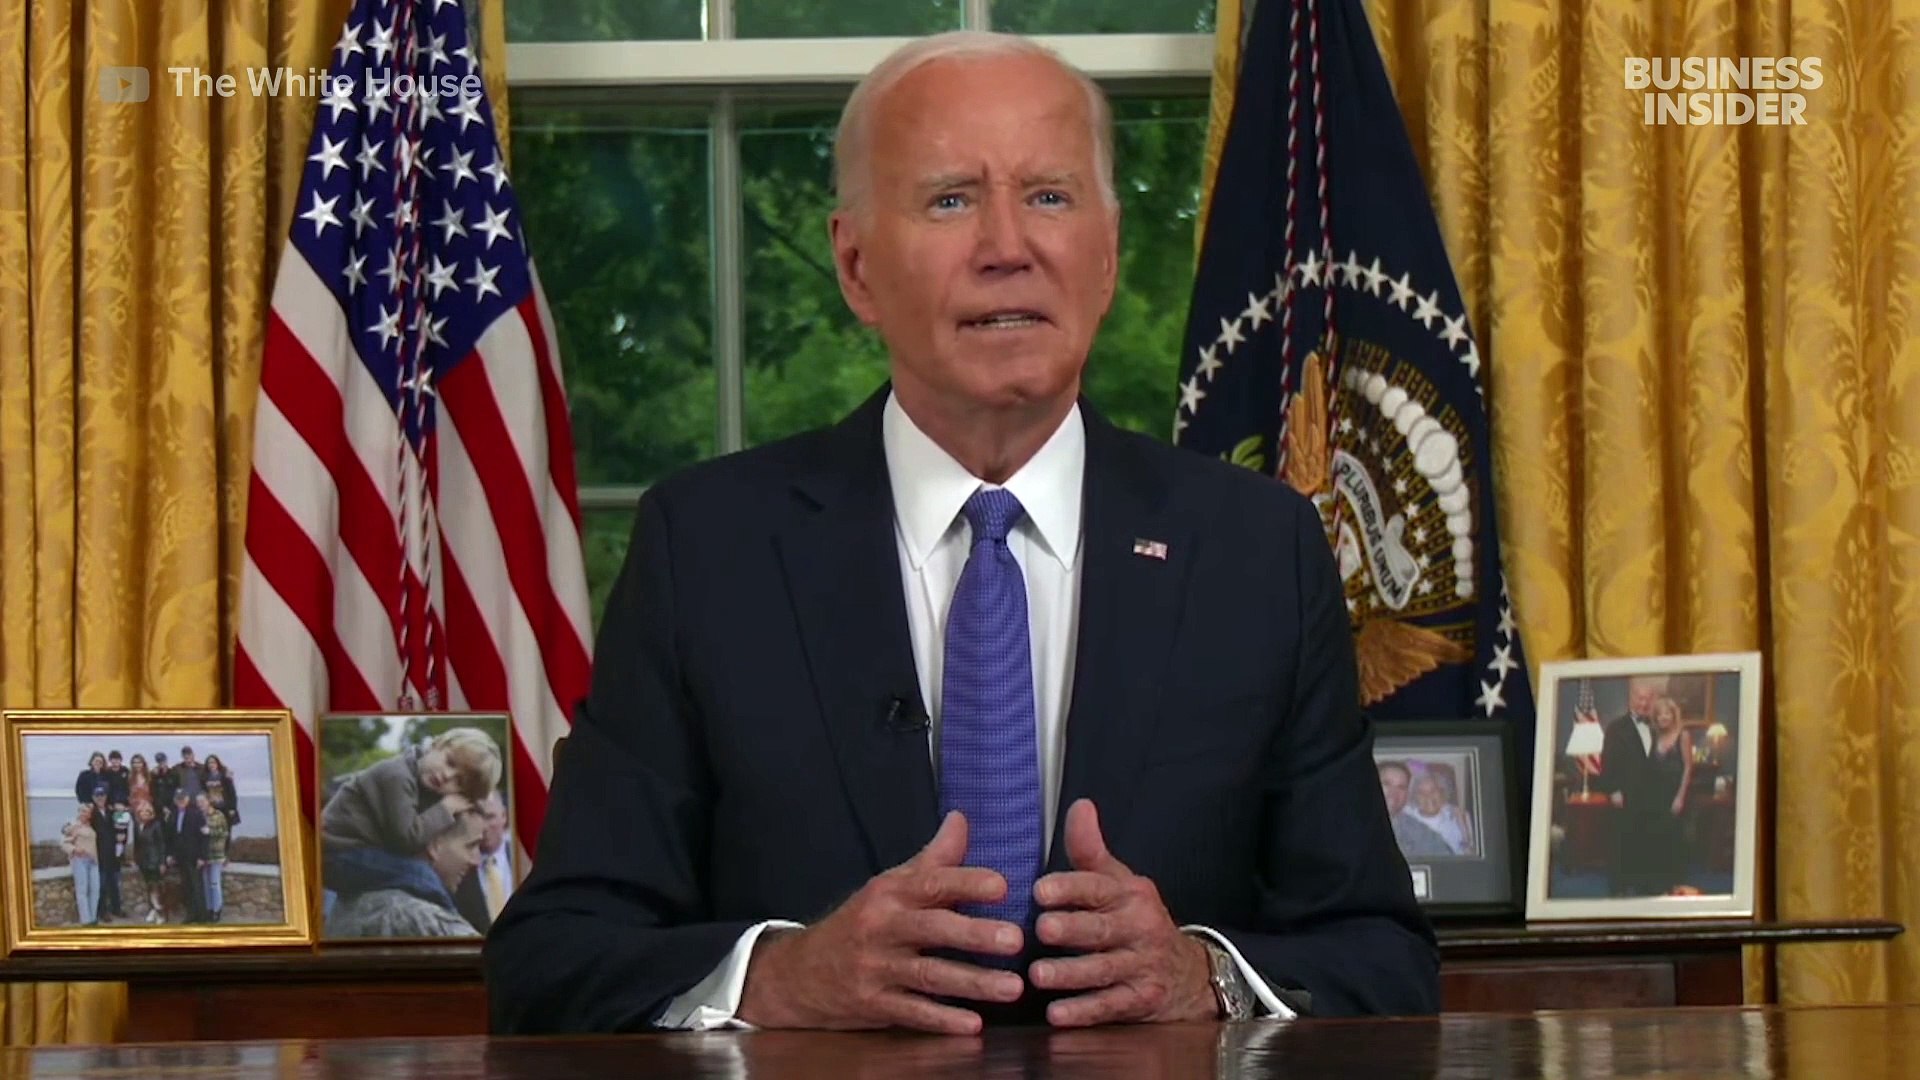 Highlights from Biden's historic Oval Office speech after withdrawing from 2024 presidential ra